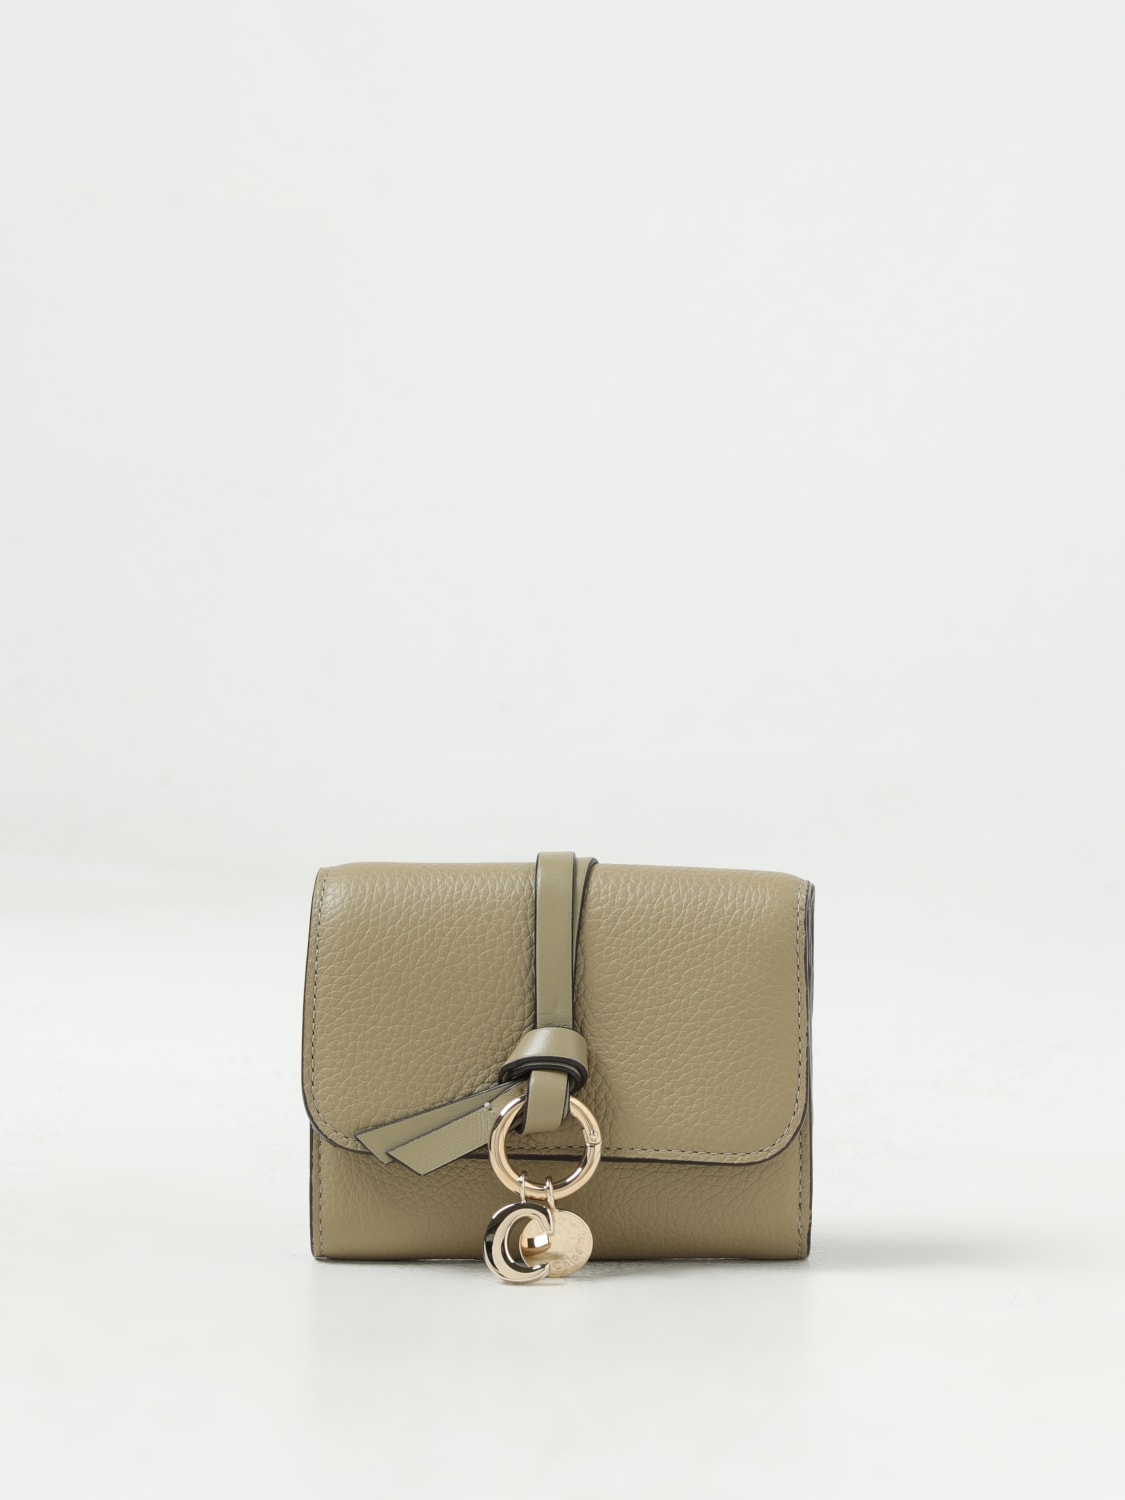 CHLOÉ: Chloé wallet in grained leather with logo charm - Green | Chloé  wallet C21WP945F57 online at GIGLIO.COM